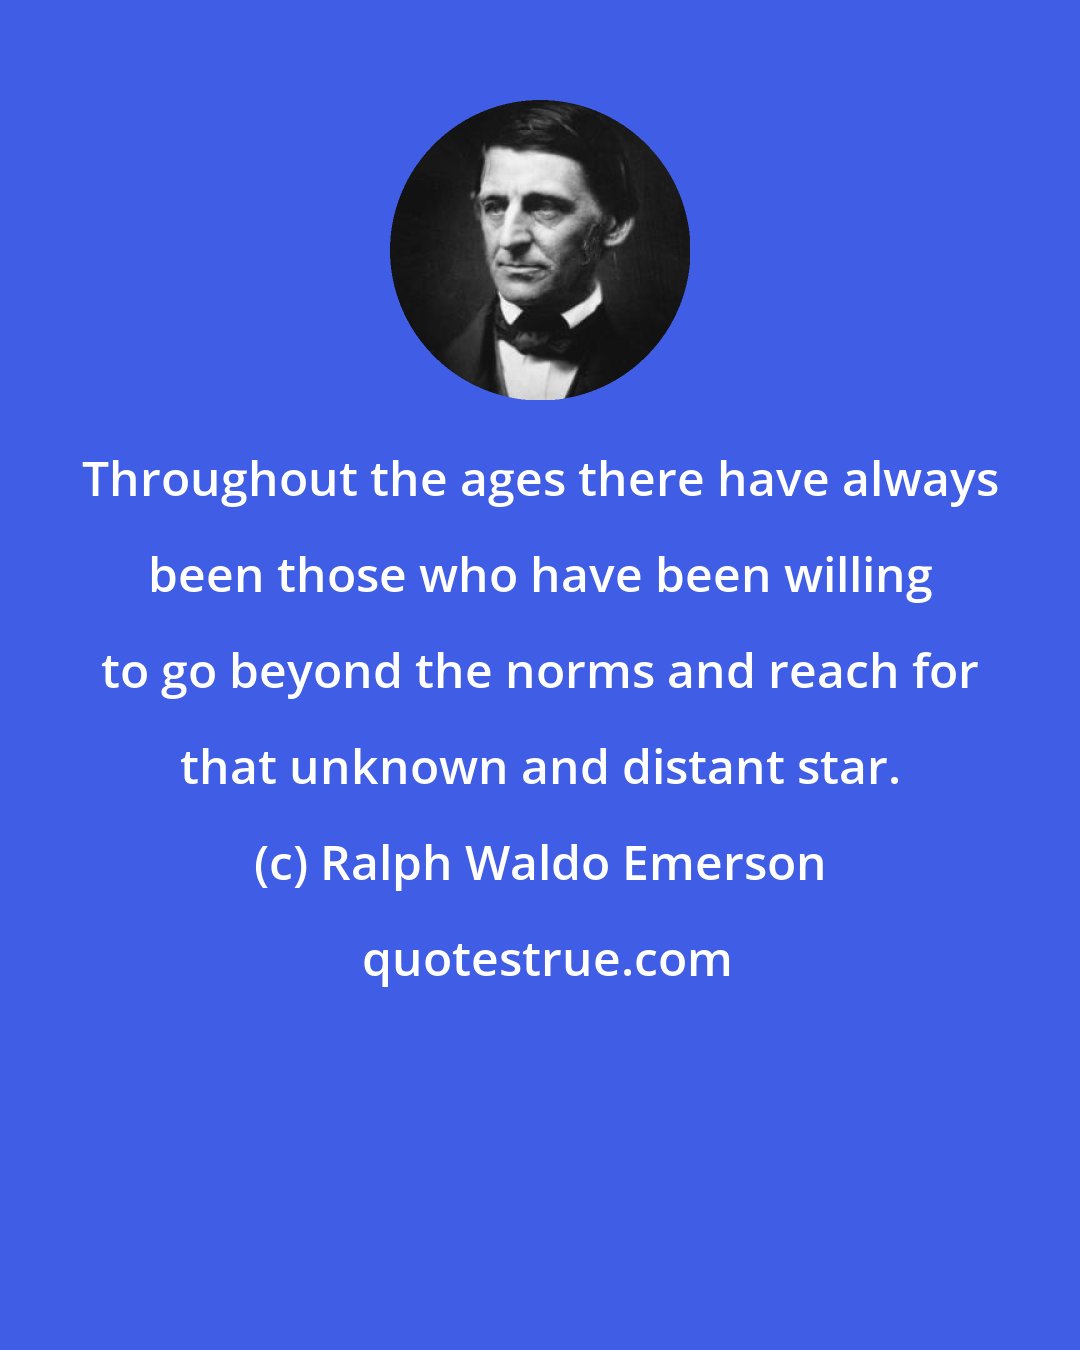 Ralph Waldo Emerson: Throughout the ages there have always been those who have been willing to go beyond the norms and reach for that unknown and distant star.